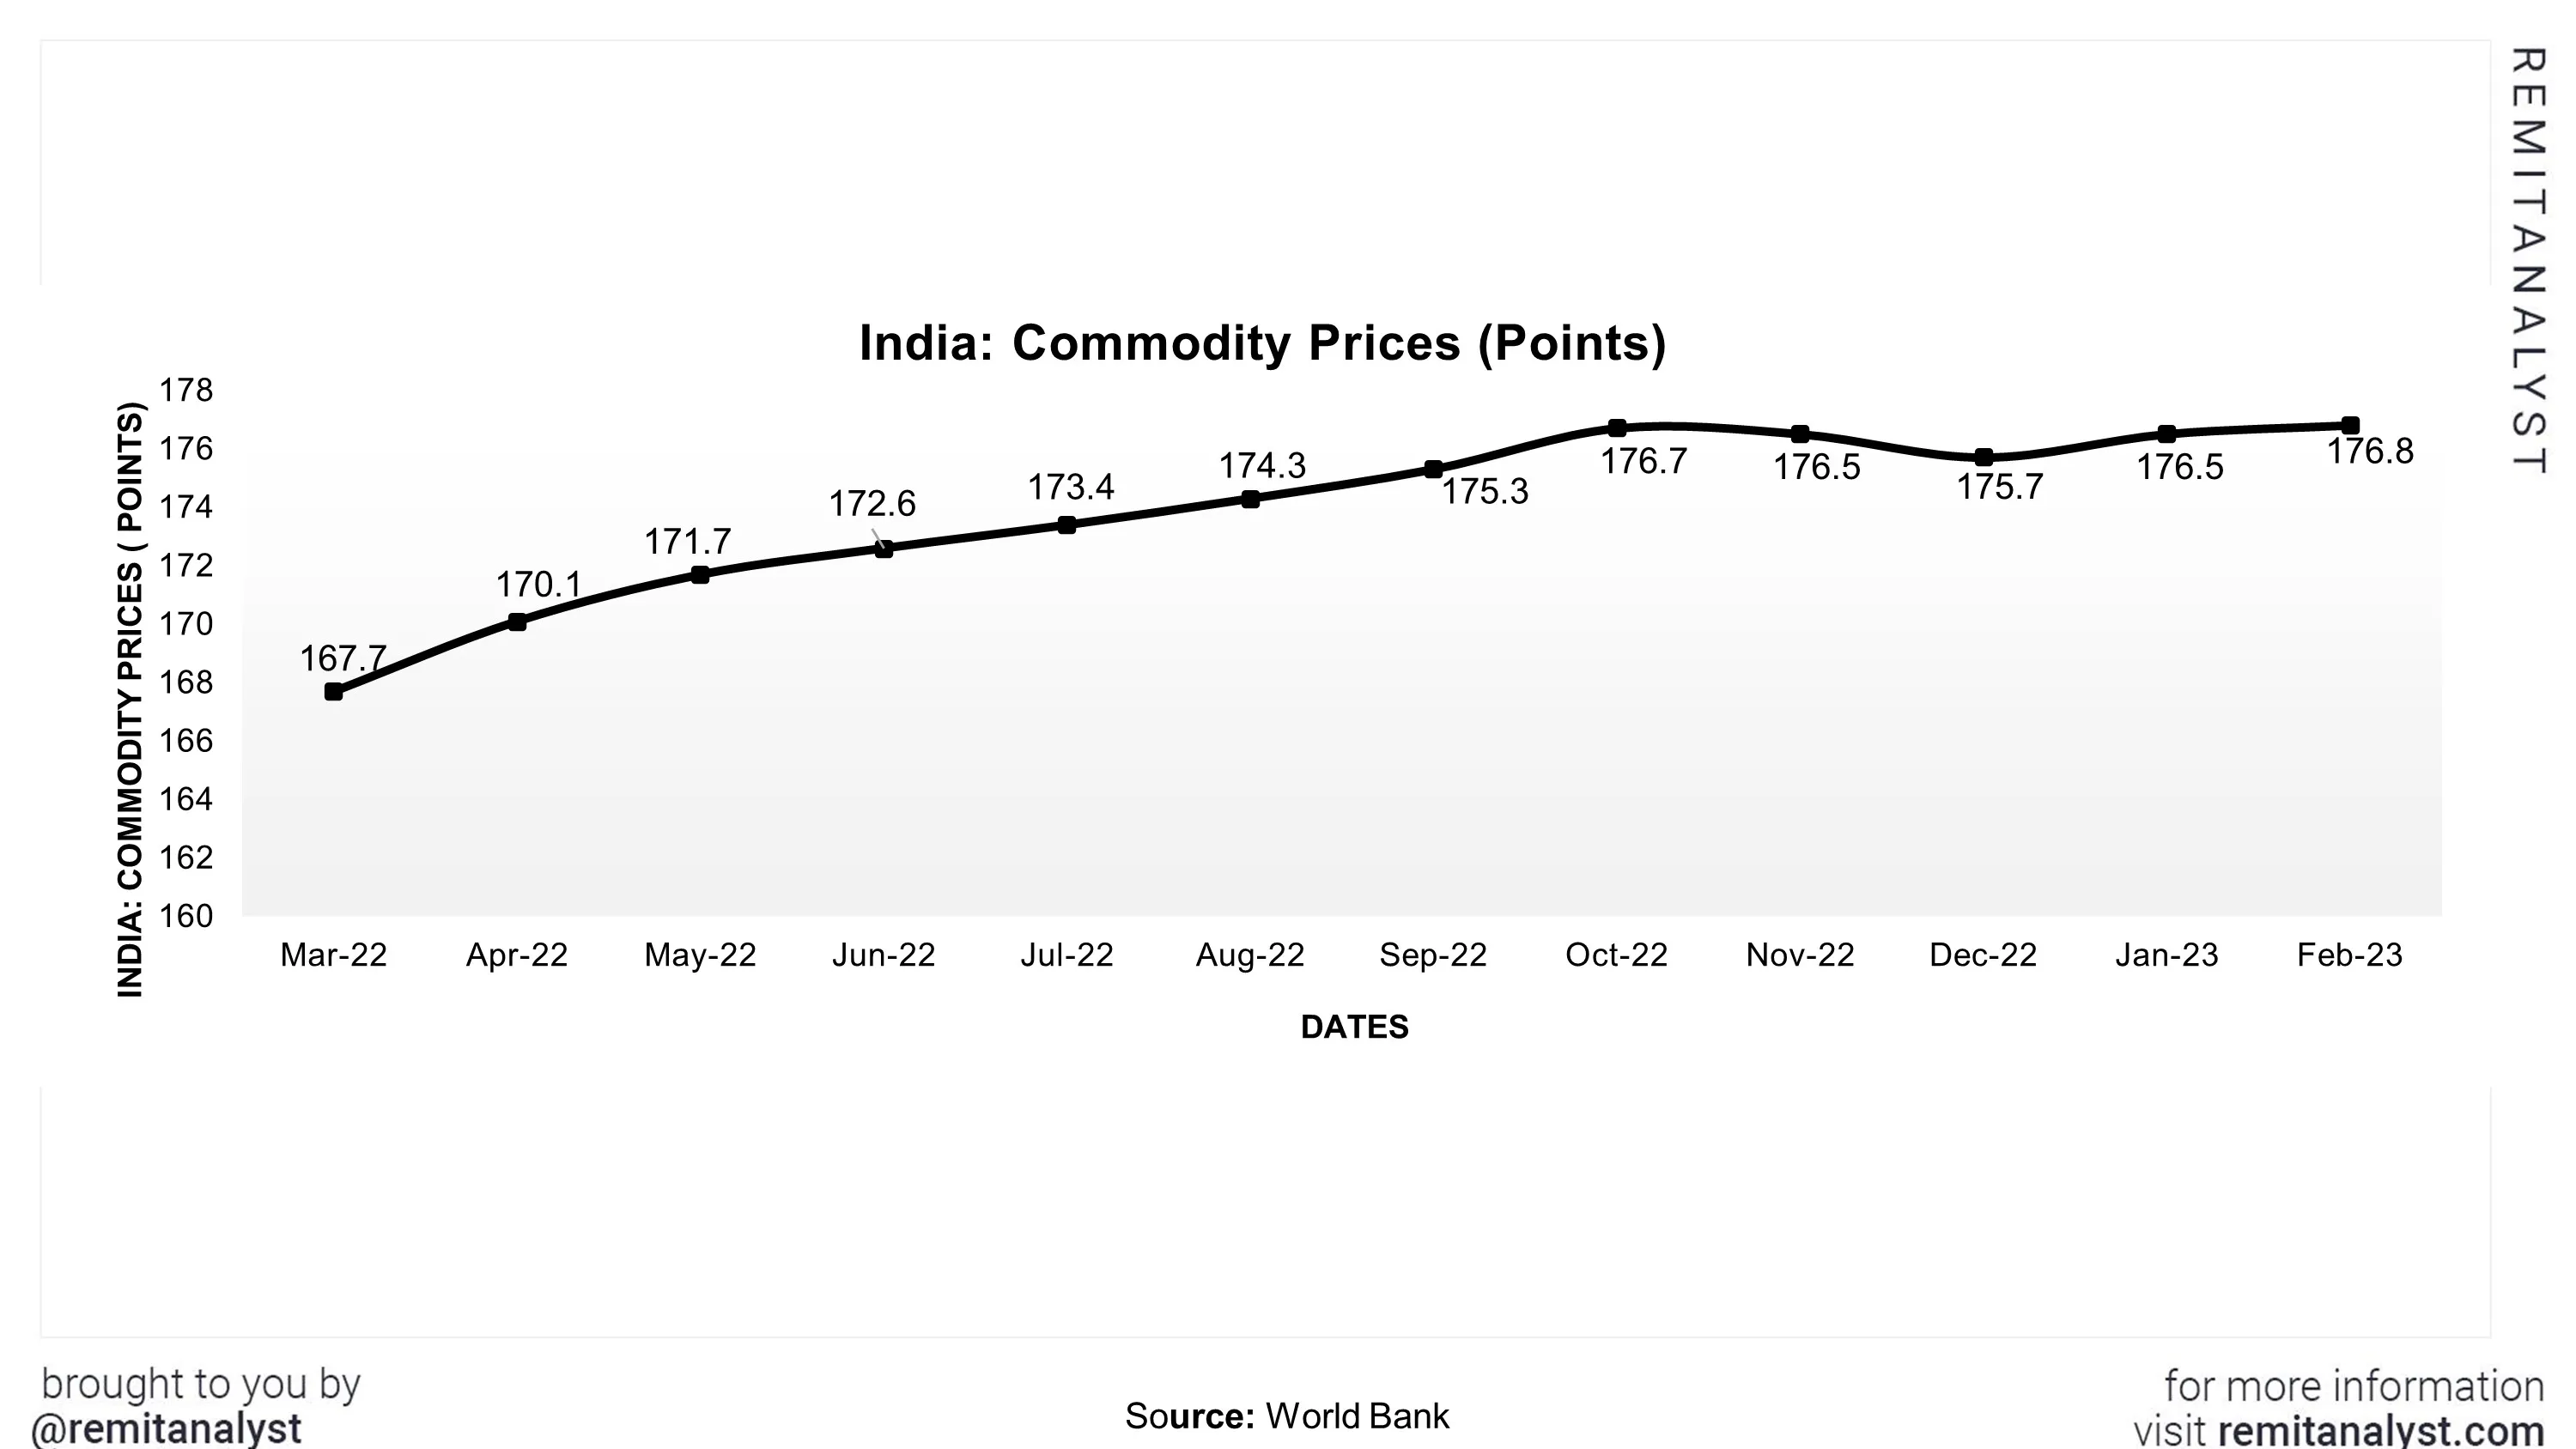 commodity -prices-india-from-mar-2022-to-feb-2023